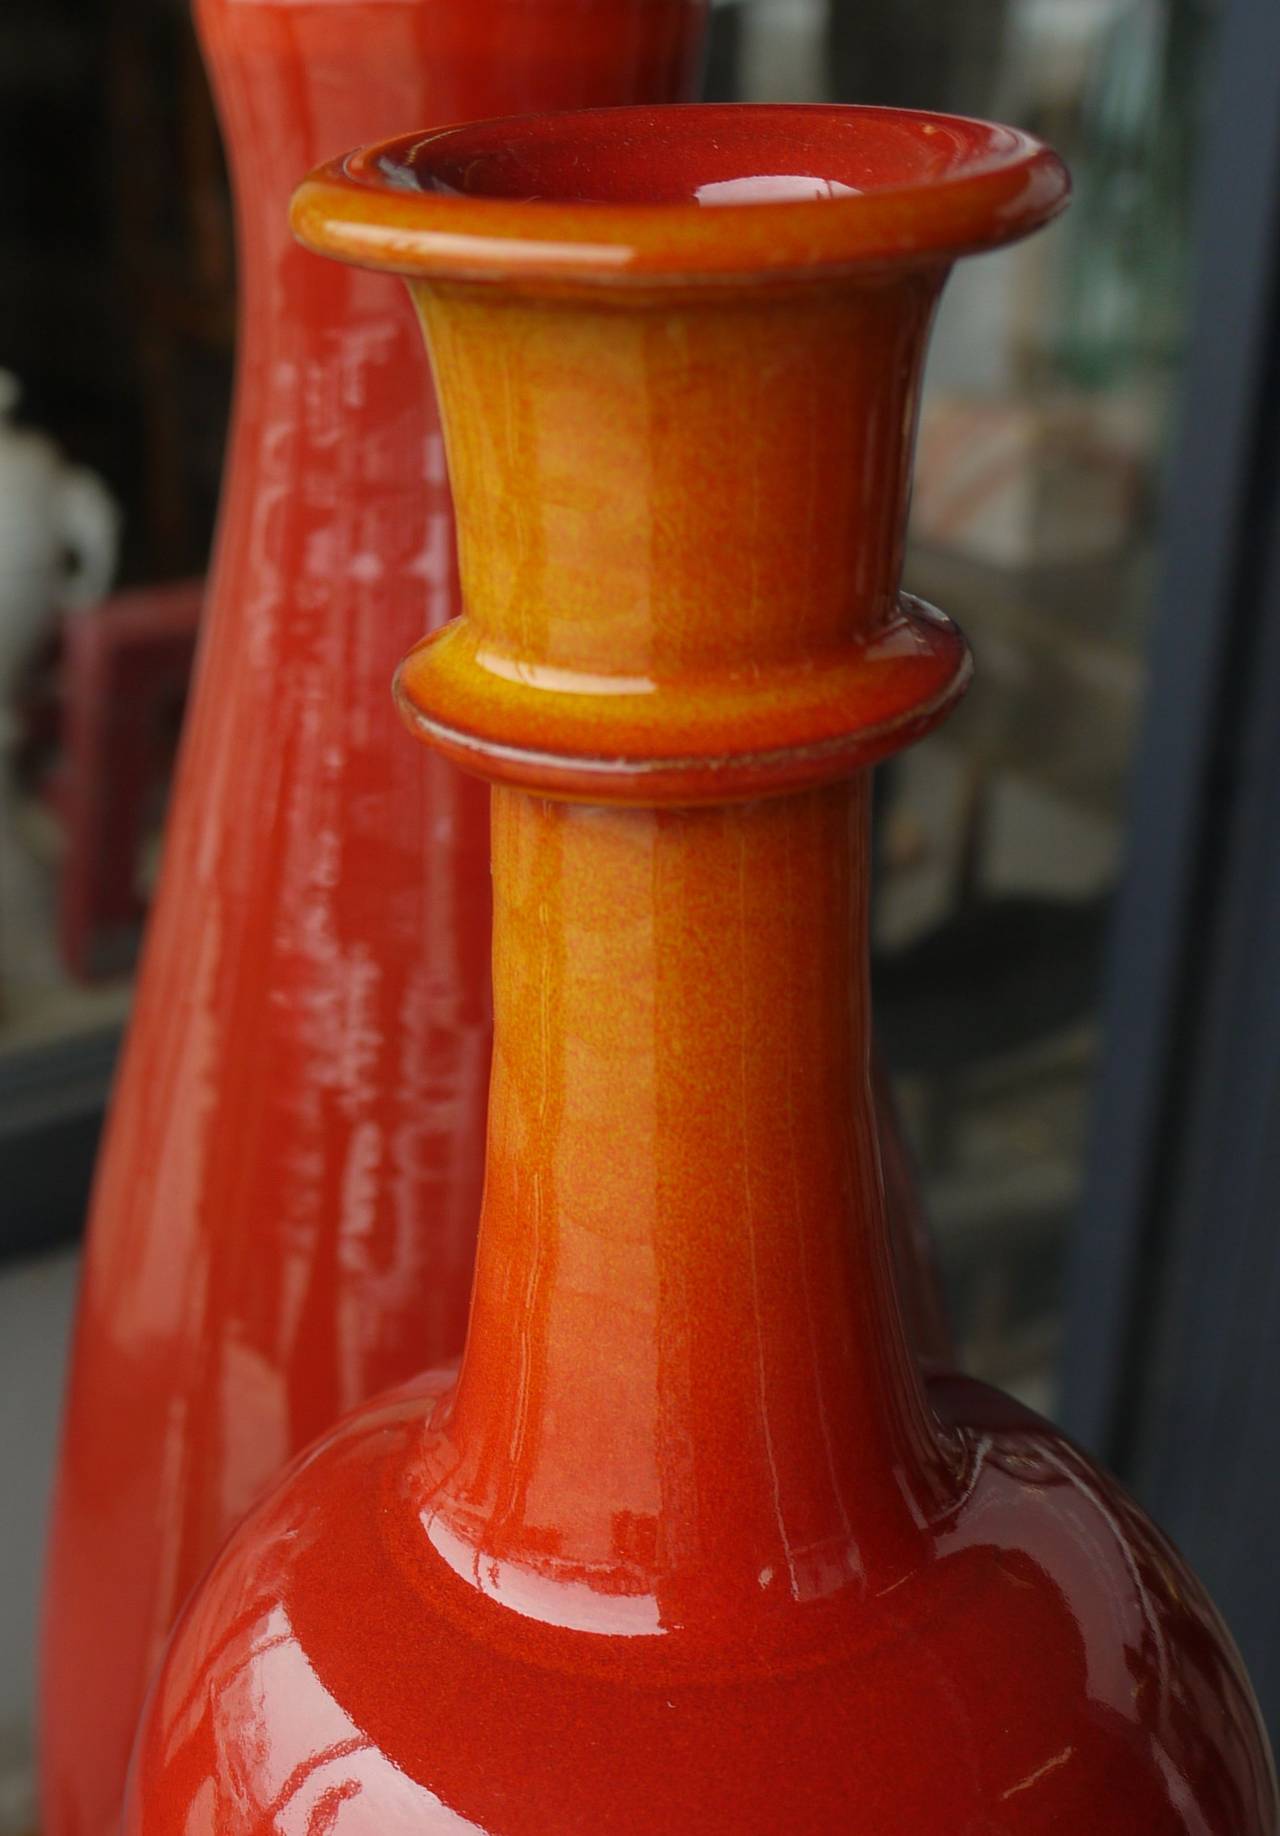 Stunning grouping of Italian ceramic vases in varying shades of orange and red bottle form vases made in Italy. Two of the vases are signed Studio Esposito and one is signed Duca di Camastra. Largest vase measures 7